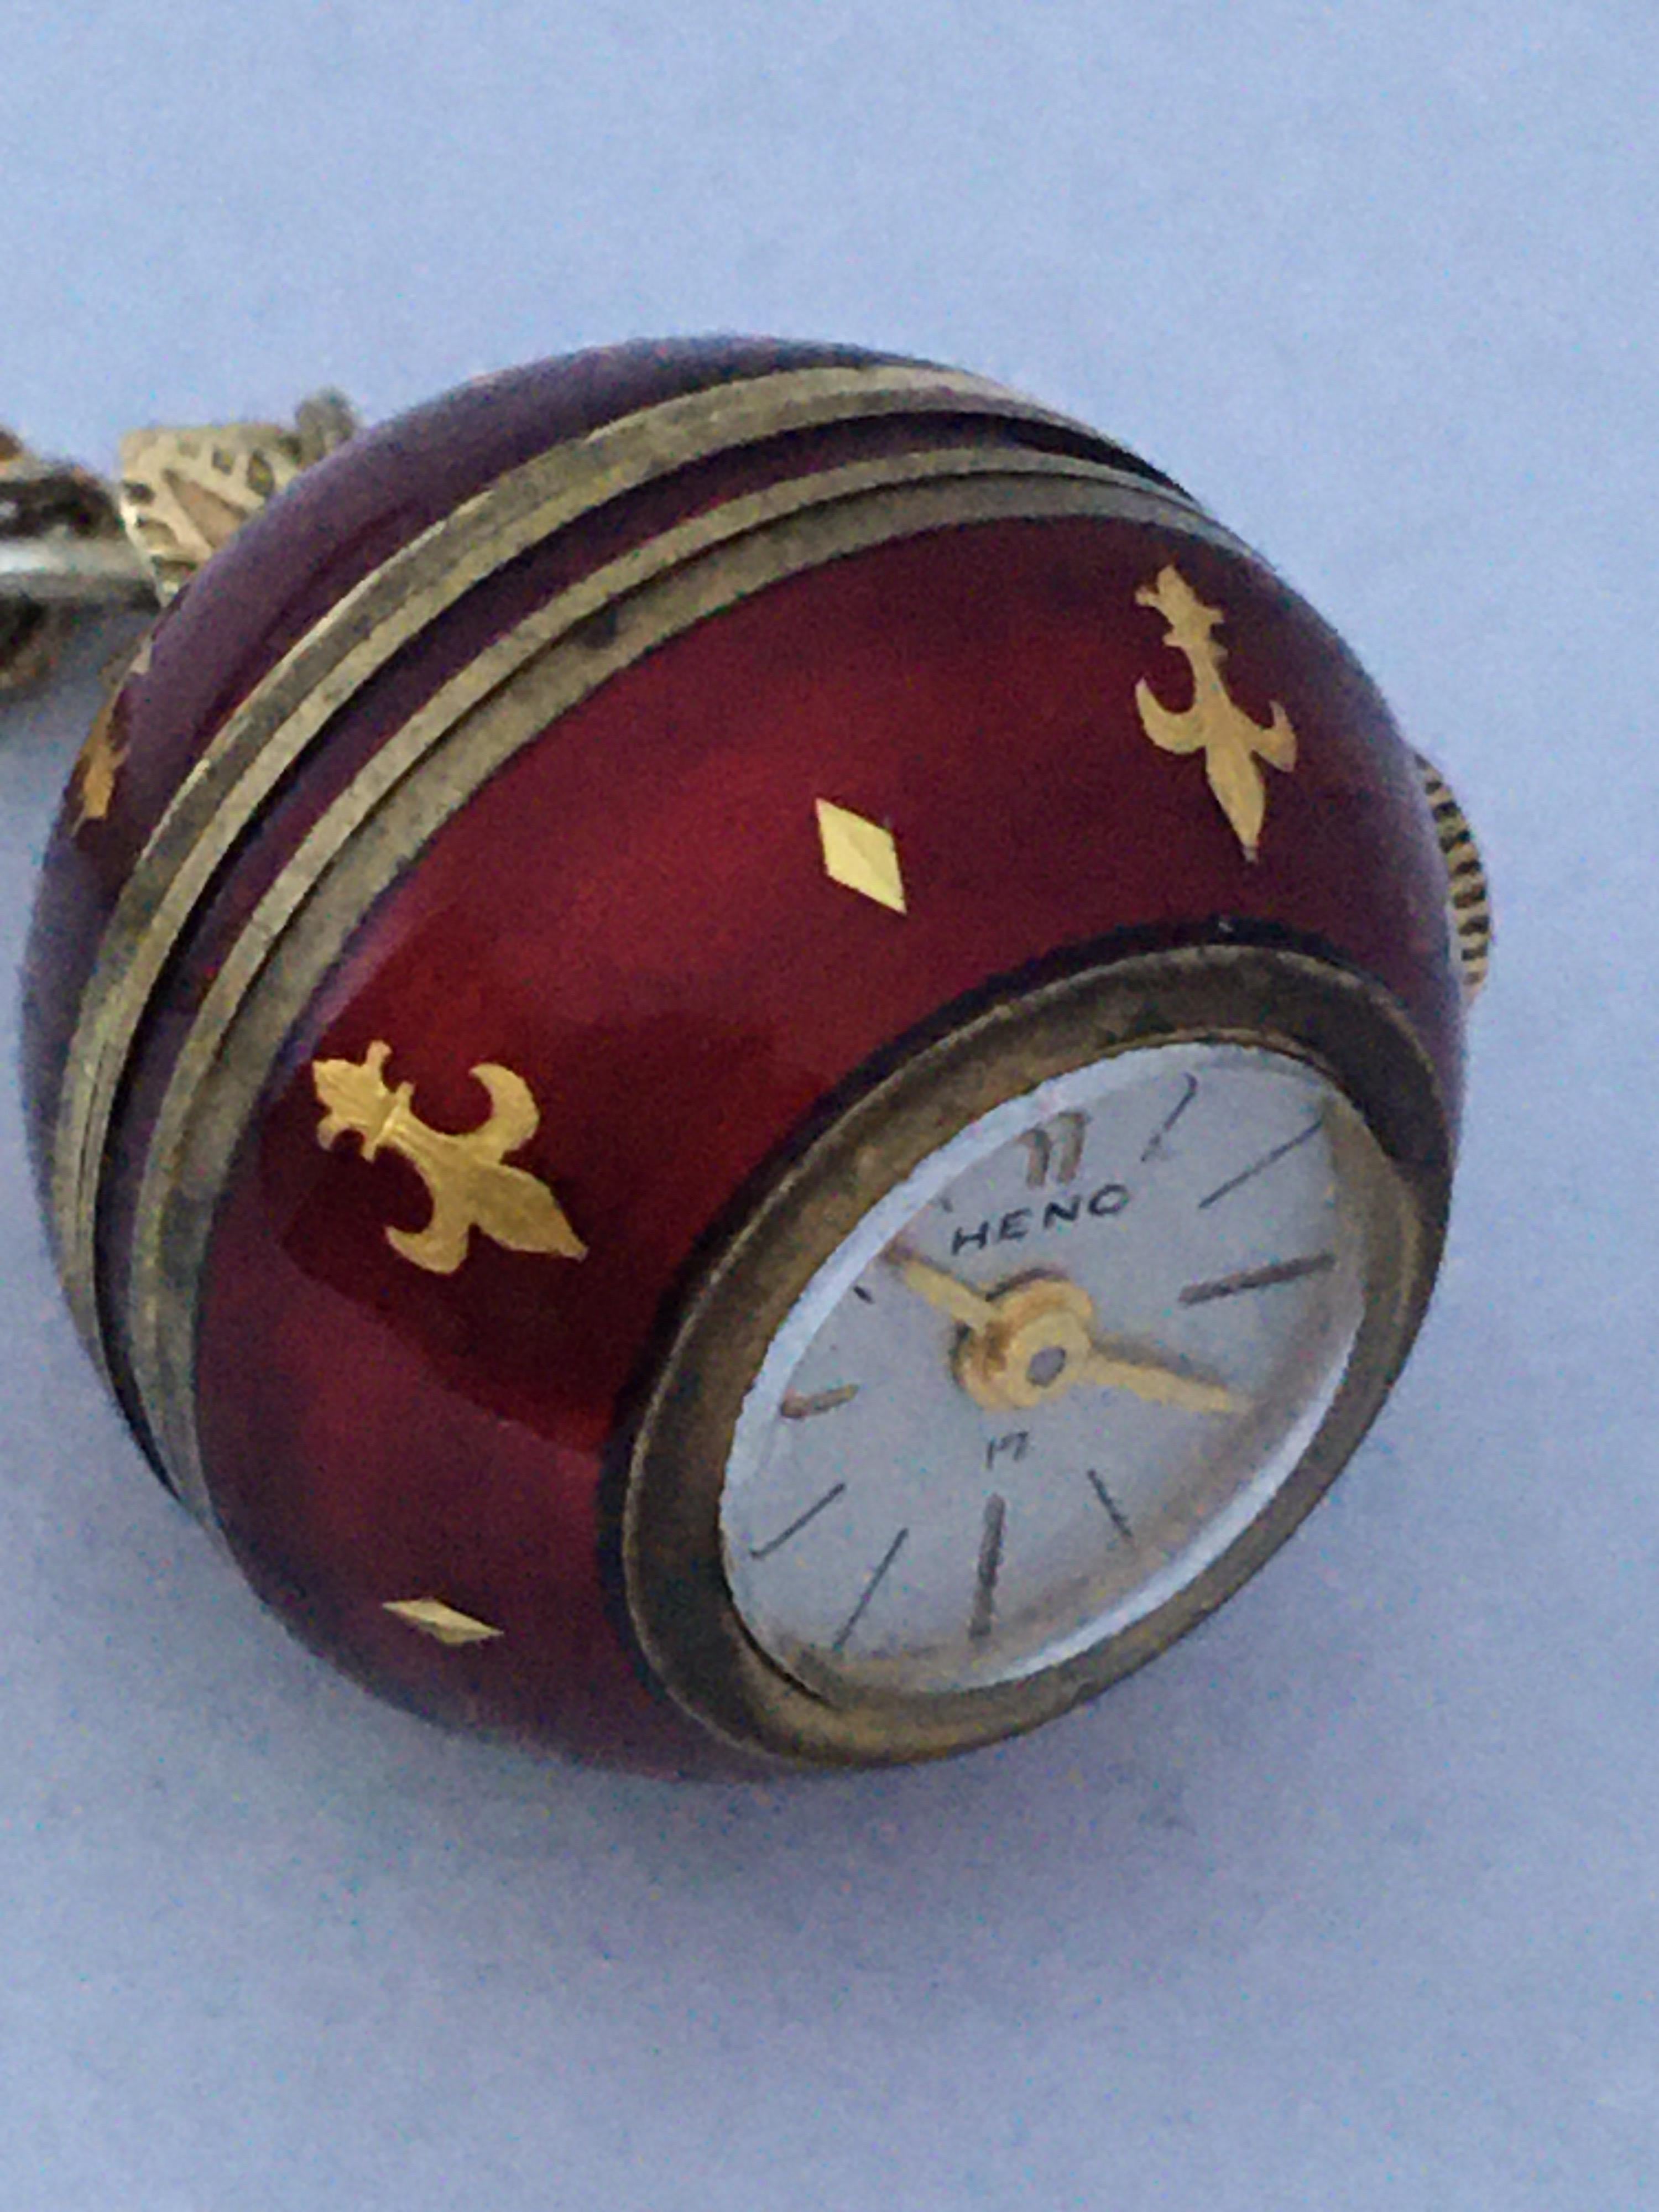 Vintage Gold-Plated Red Enamel Guilloche Hand-Winding Ball Pendant Swiss Watch In Good Condition For Sale In Carlisle, GB